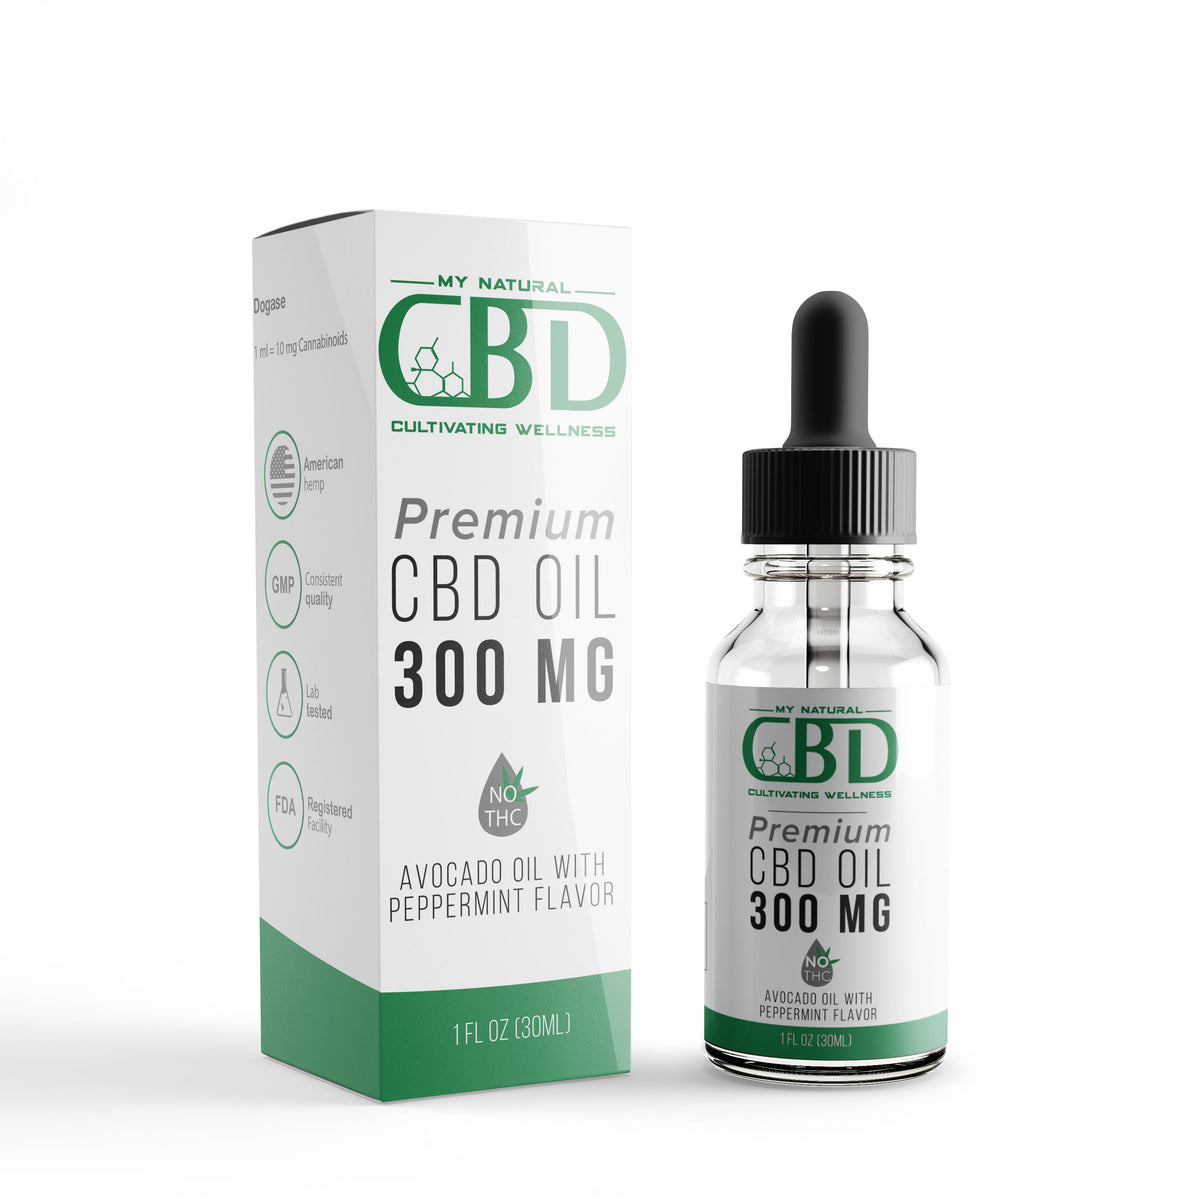 300 MG Isolate CBD Tincture peppermint flavored with avocado oil